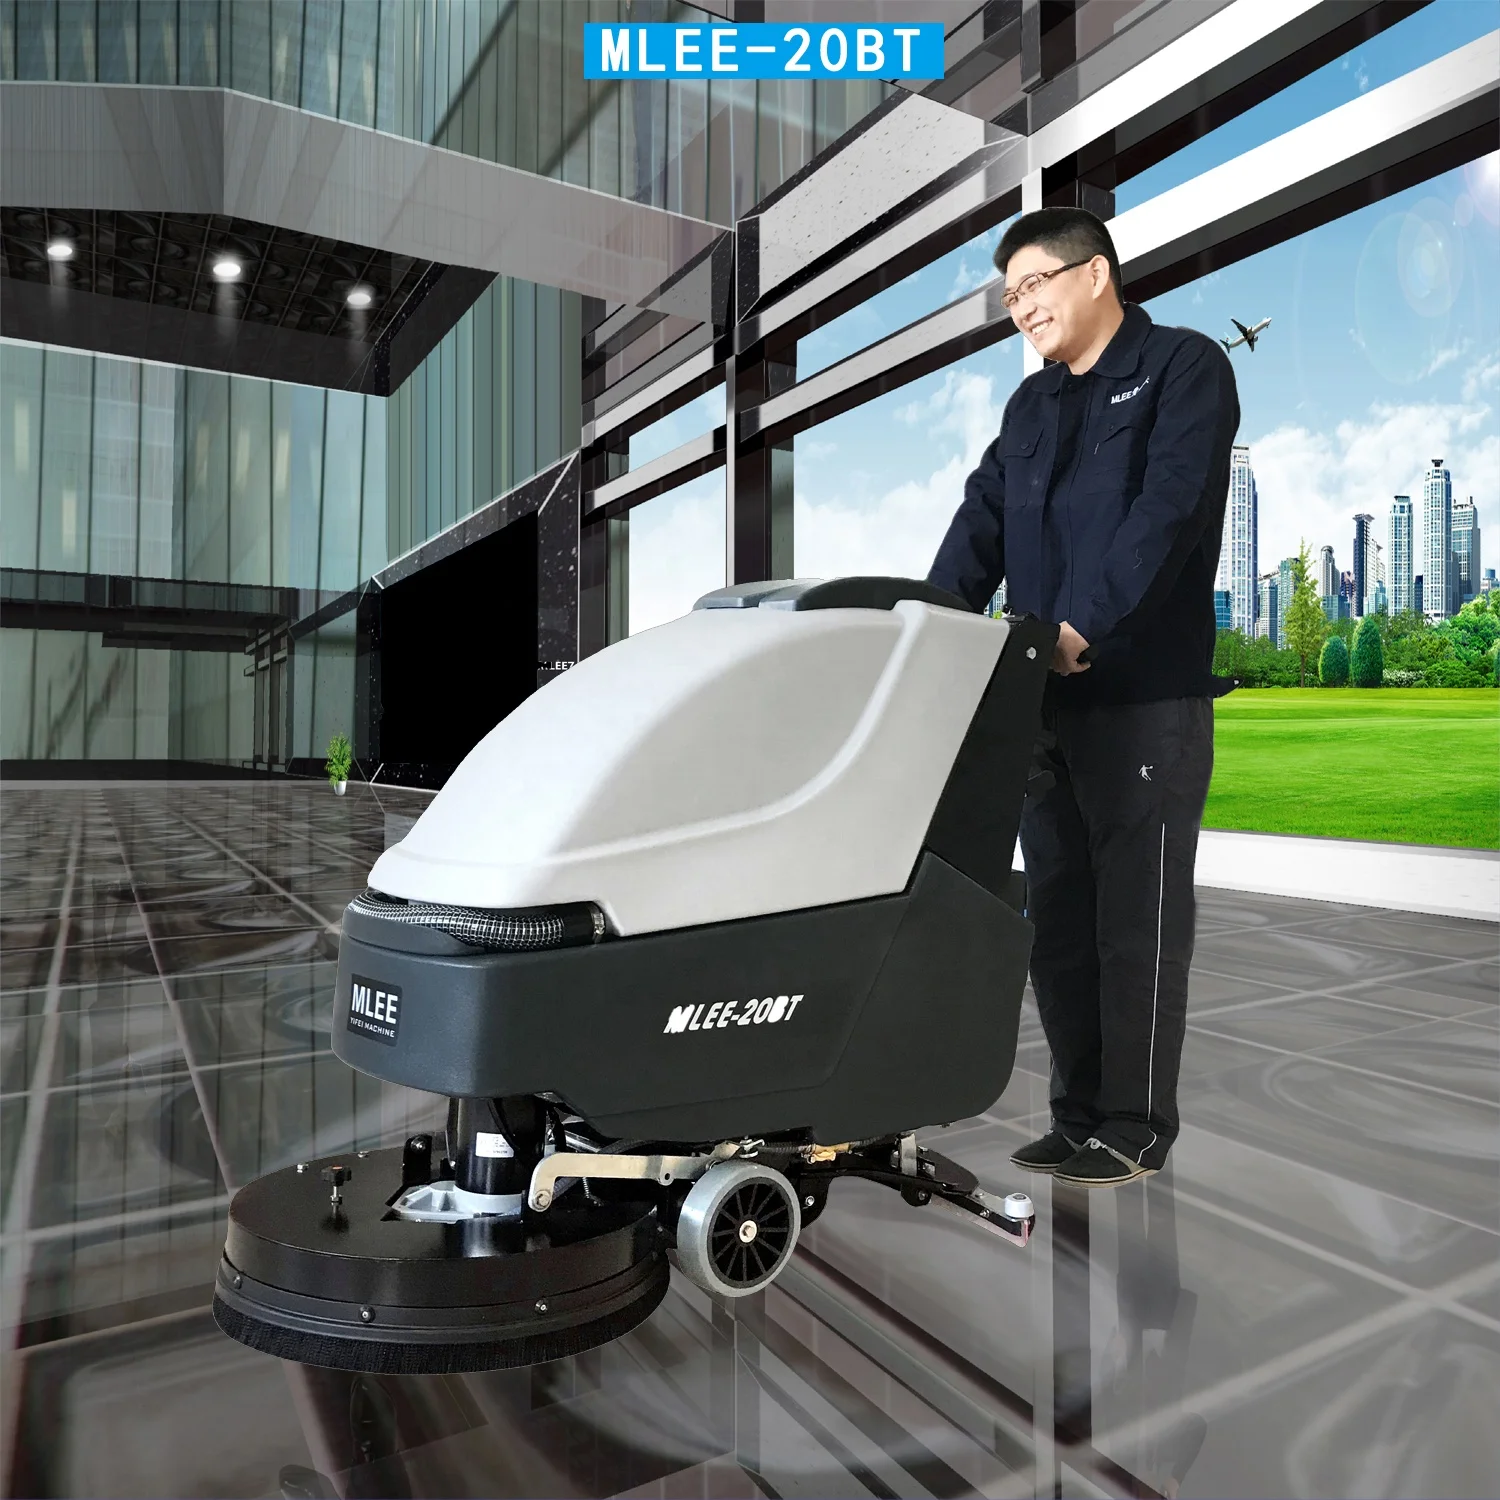 

MLEE-20BT Self-propelled Tile Scrubber Commercial Automatic Floor Cleaning Machine